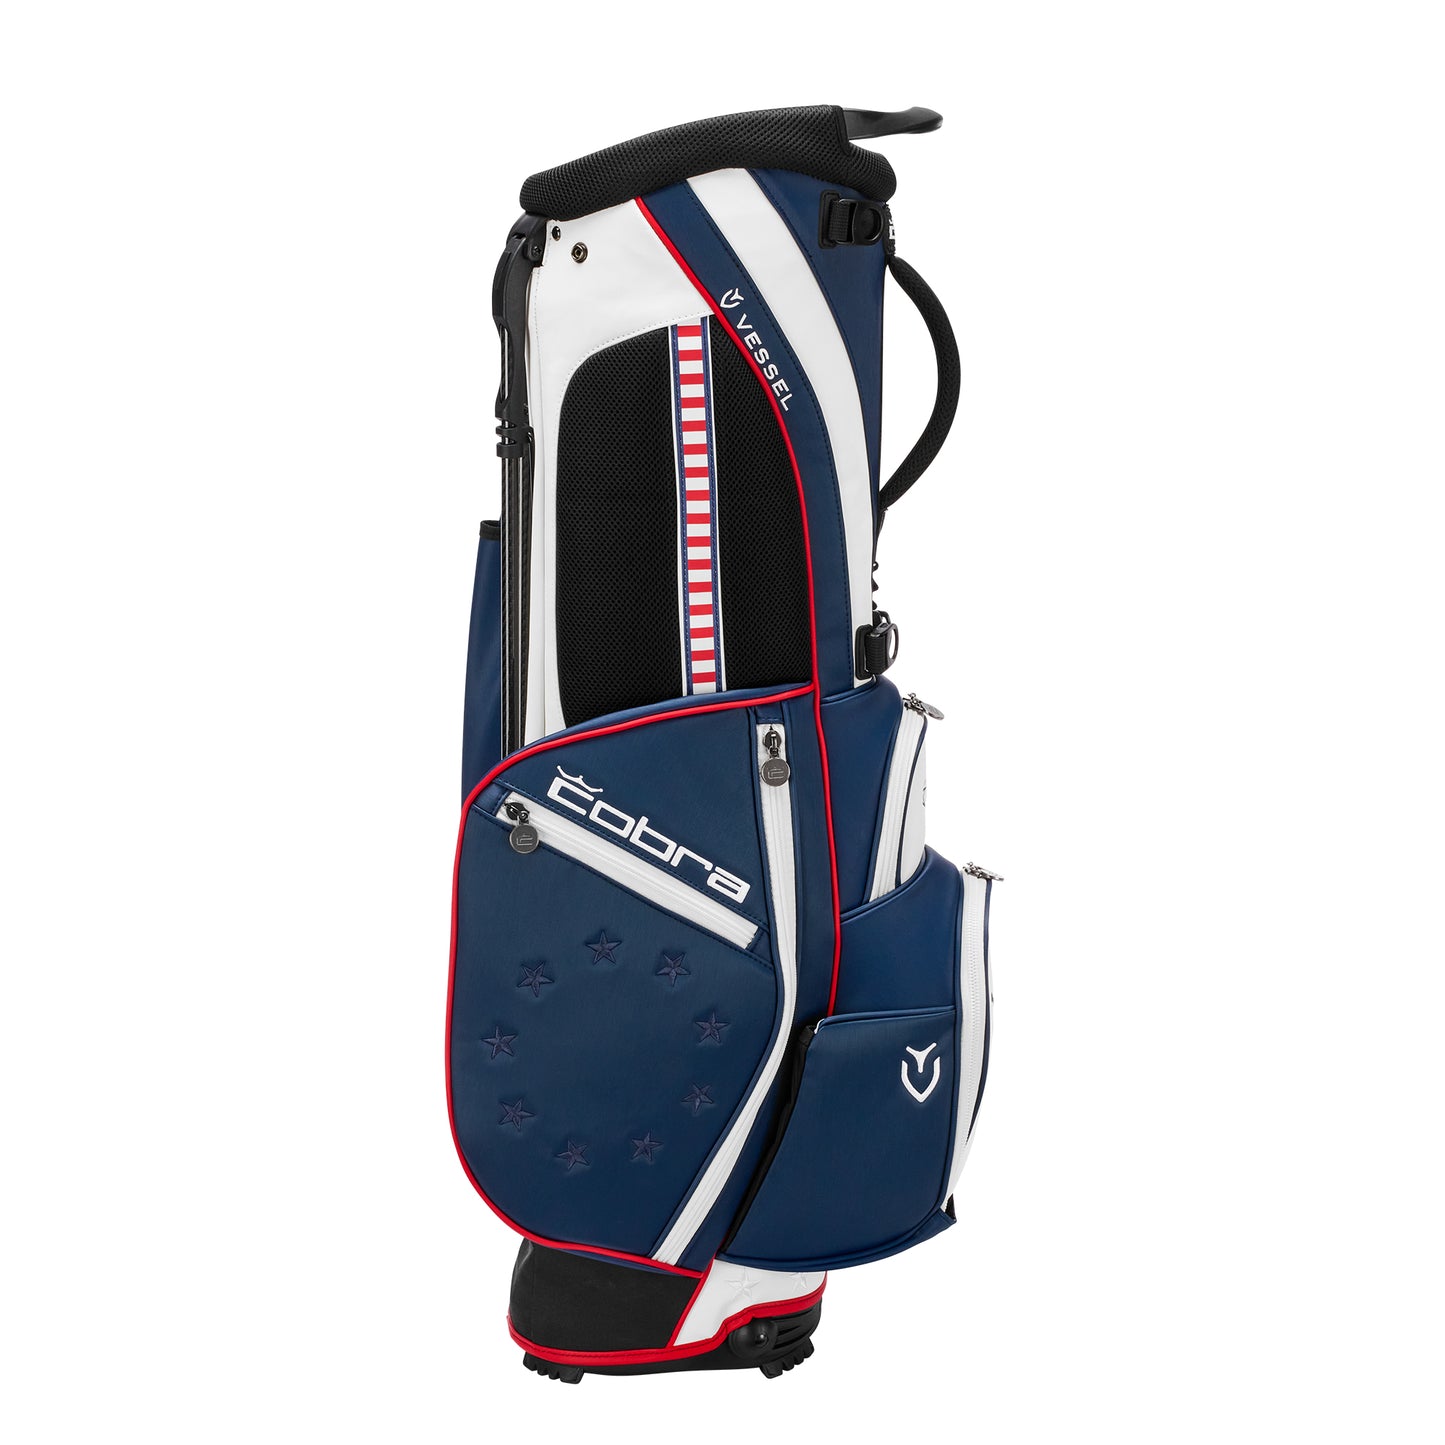 Limited Edition - Stars Stand Golf Bag